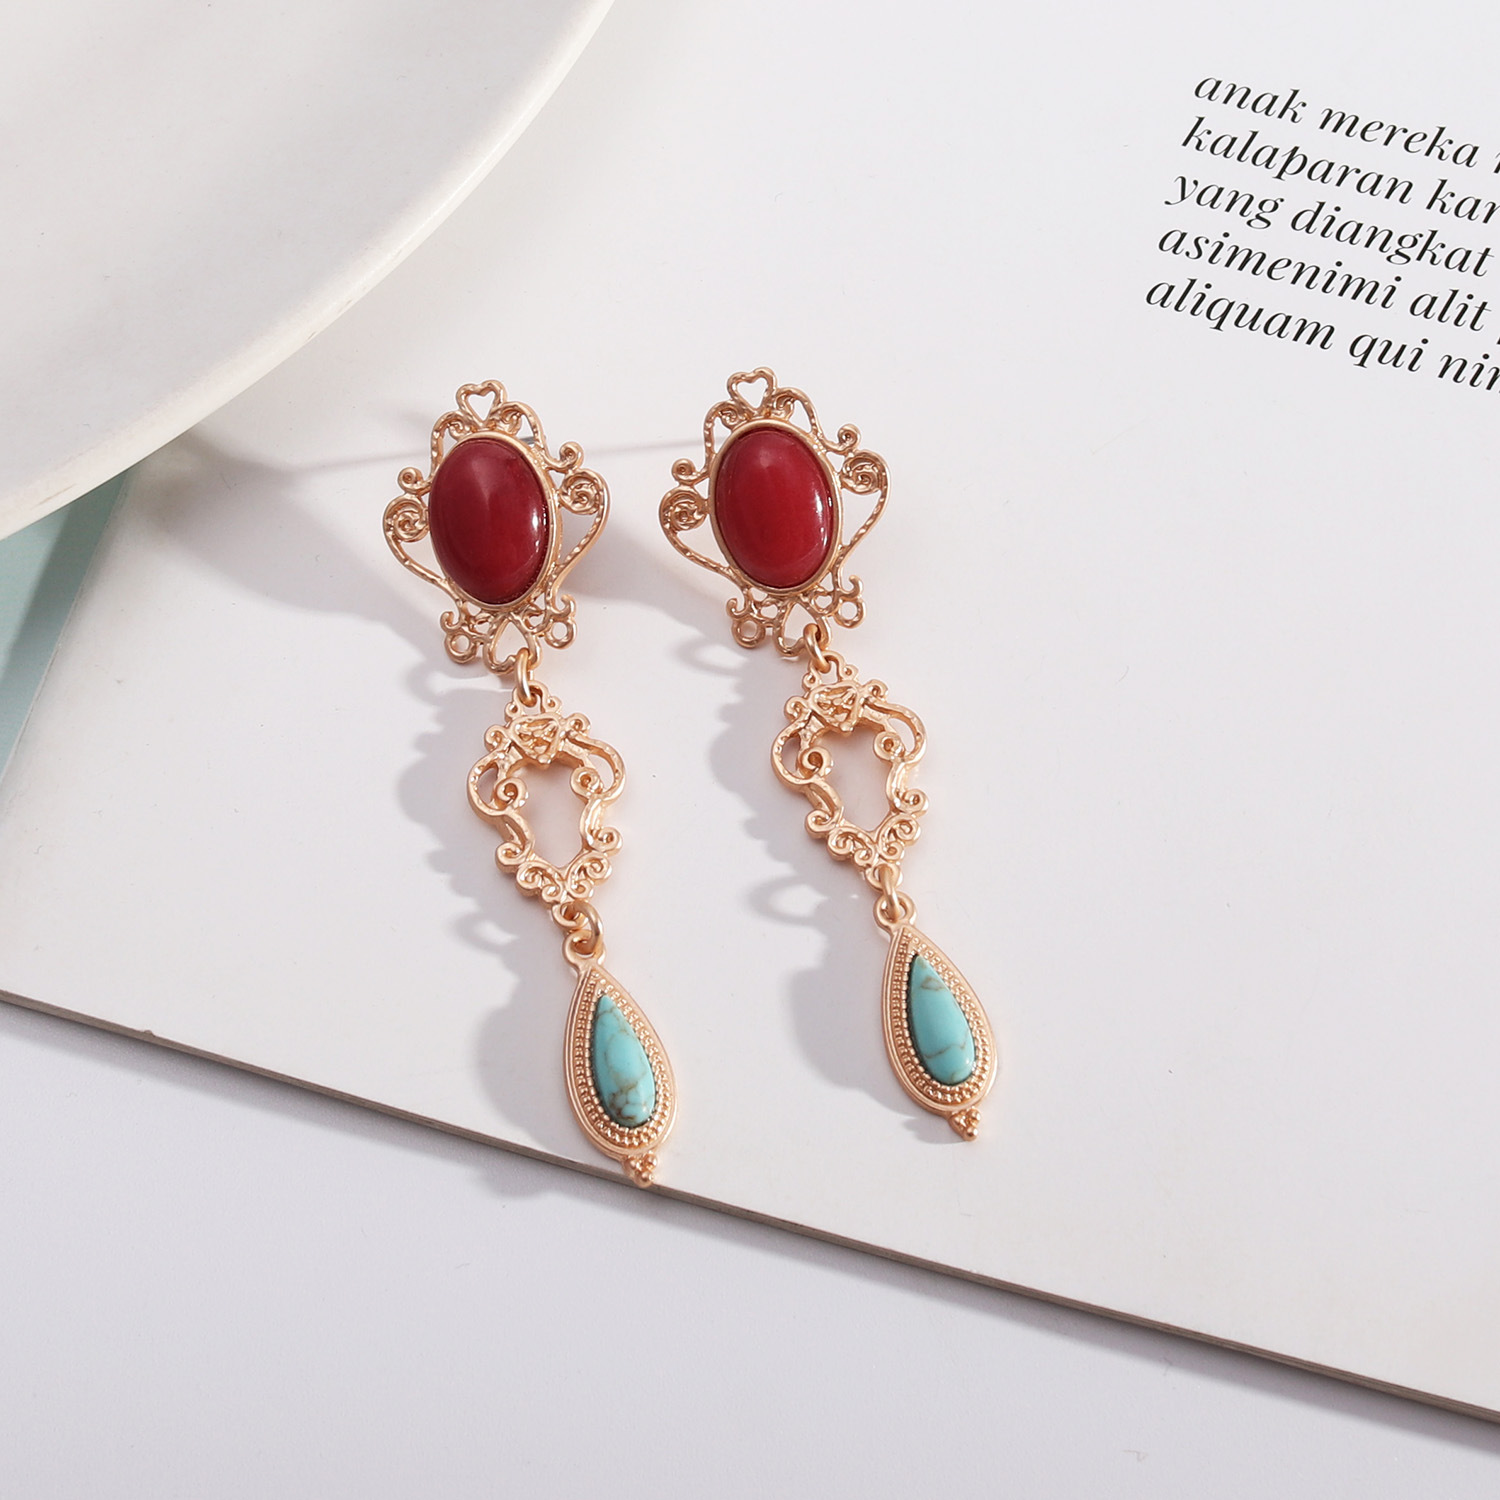 Red agate + light blue pine